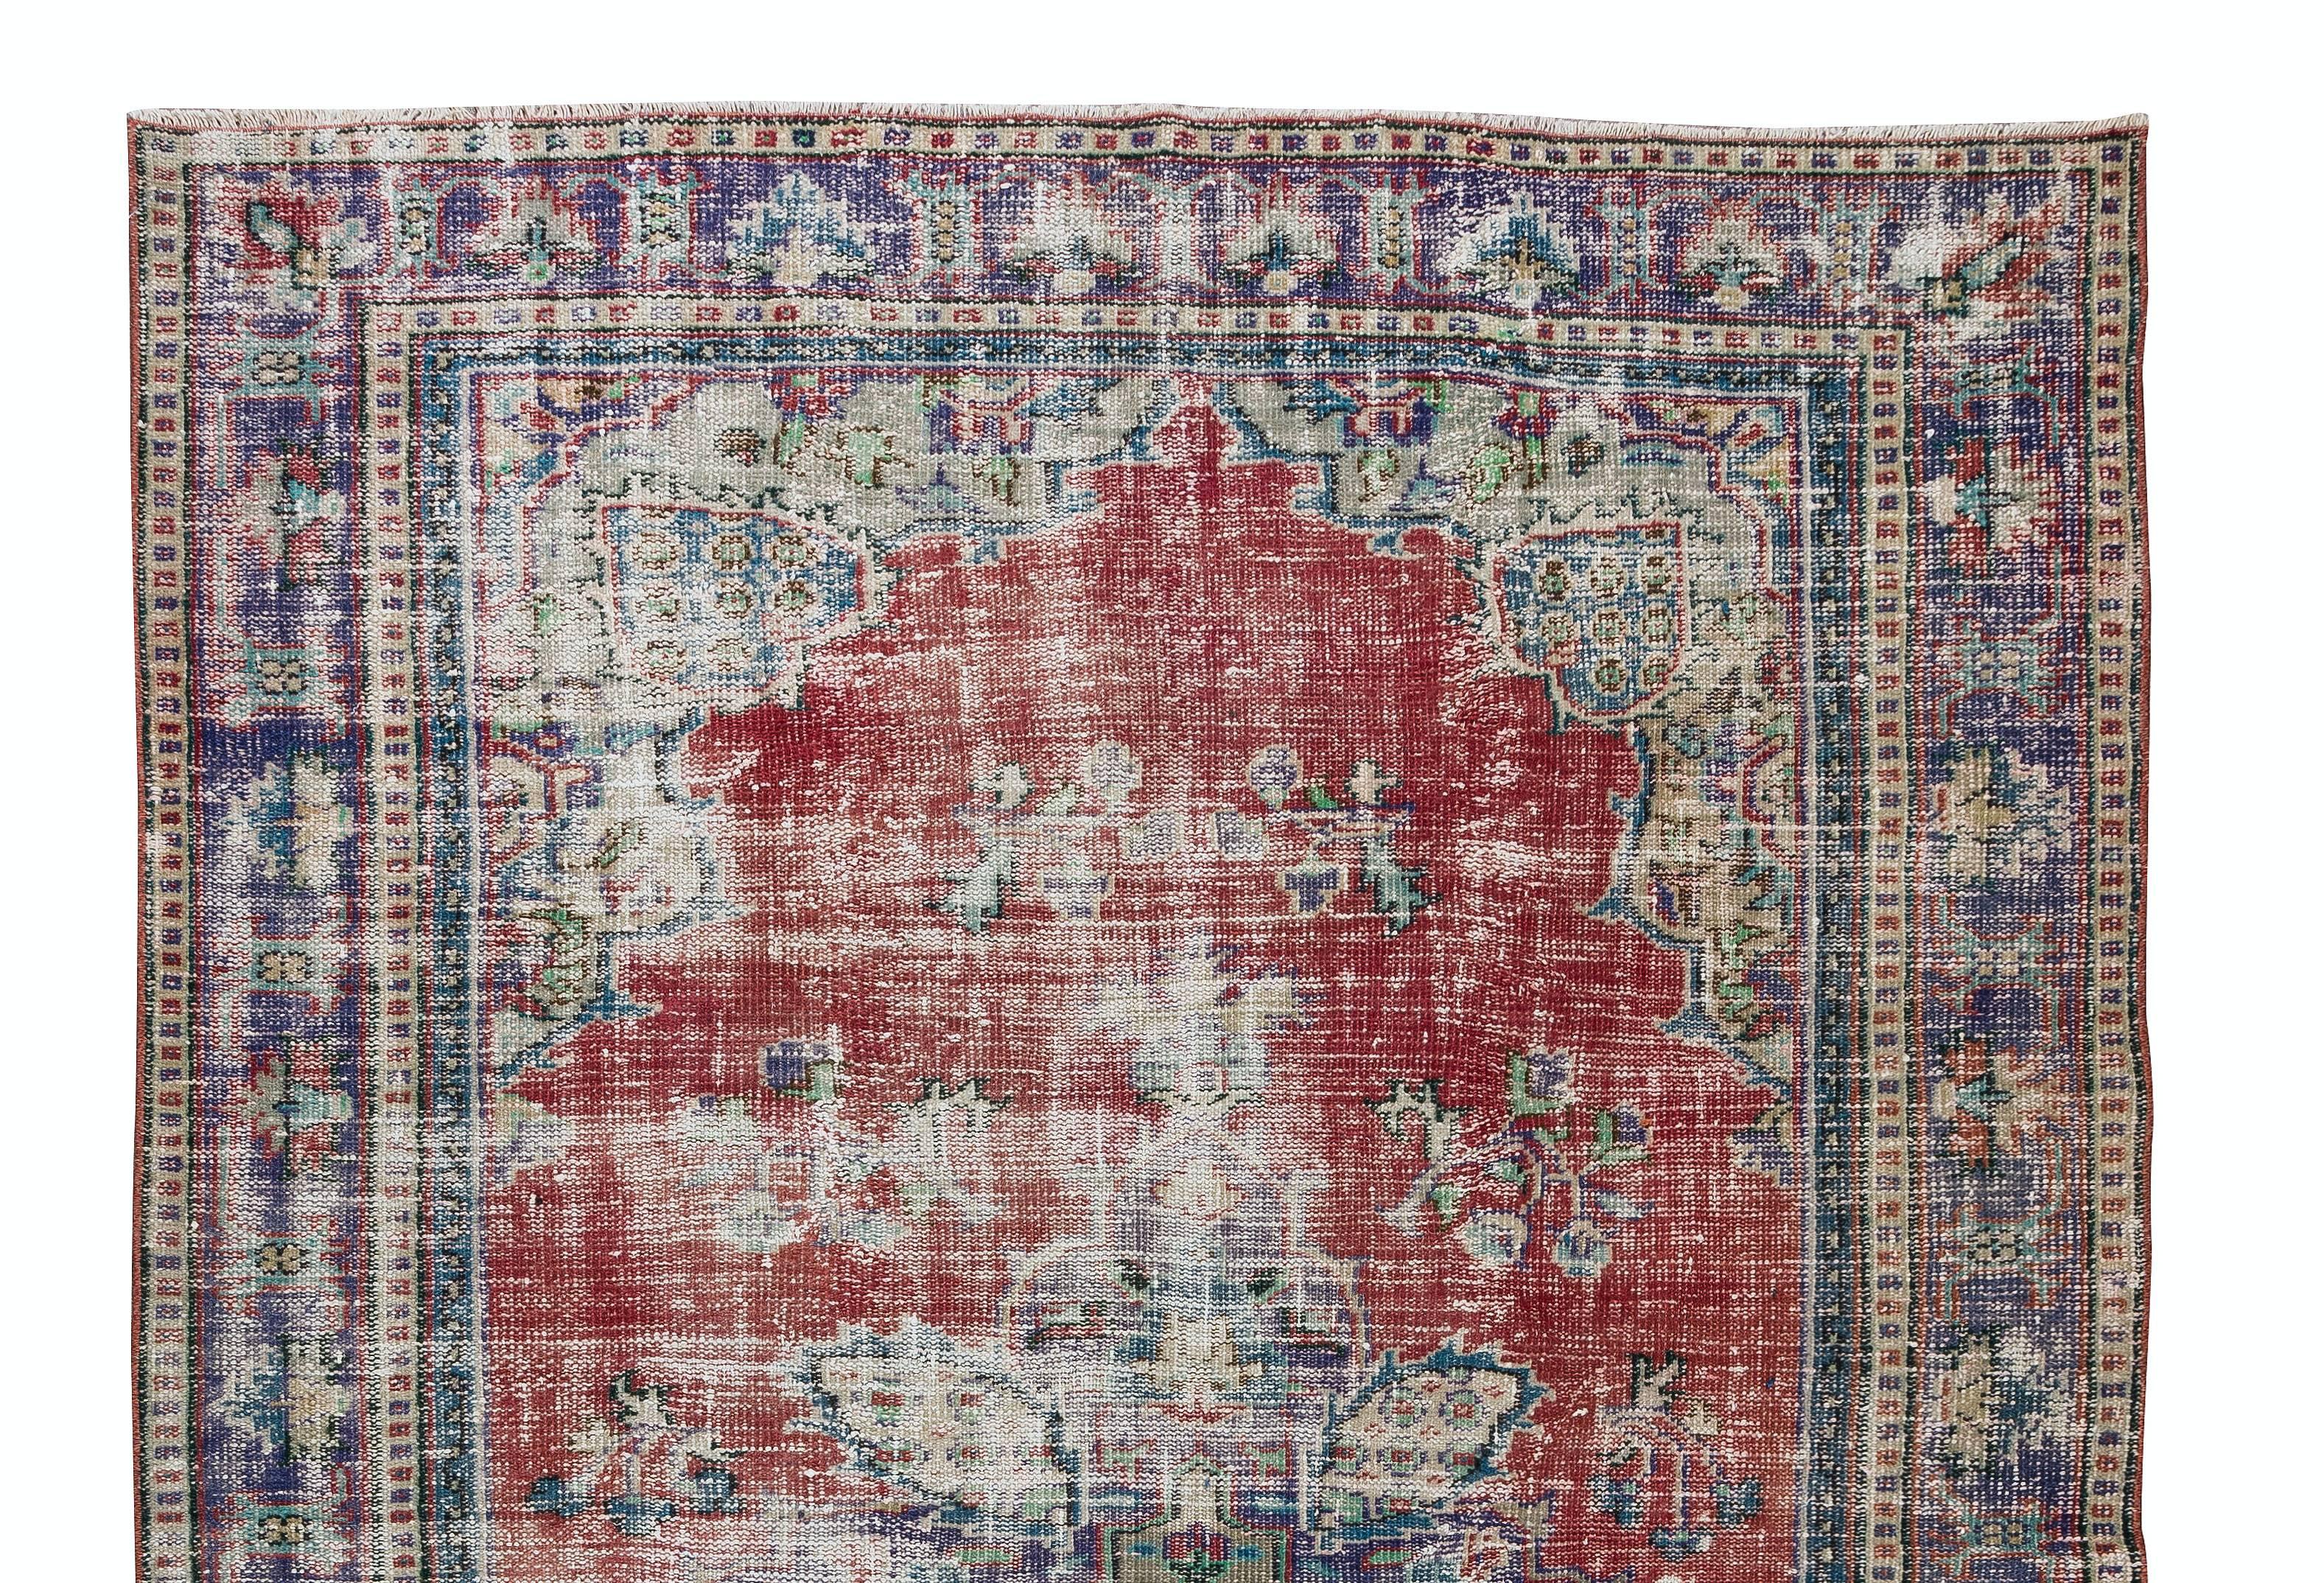 Hand-Woven 6.6x9.6 Ft Vintage Shabby Chic Handmade Turkish Area Rug with Medallion Design For Sale